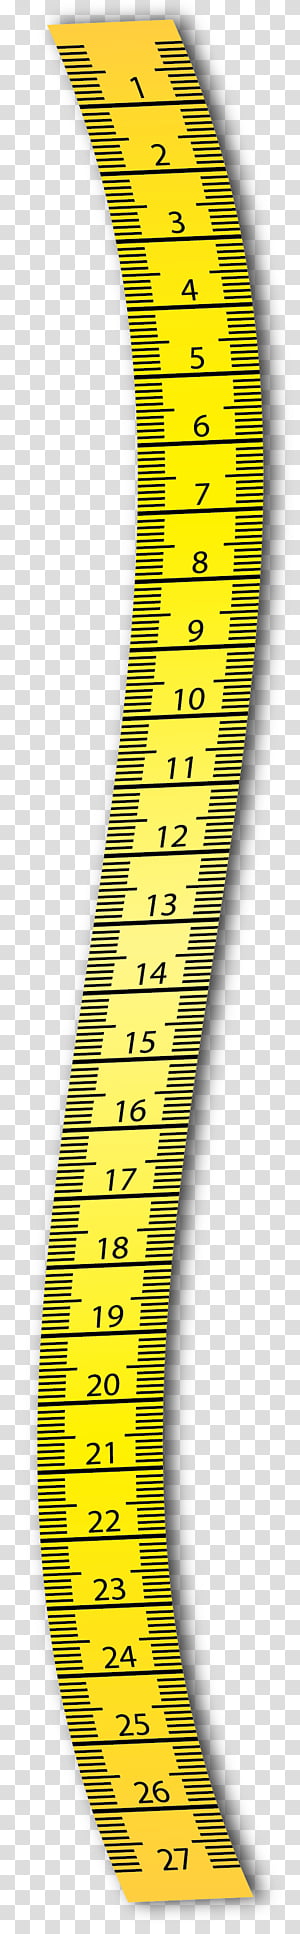 https://p1.hiclipart.com/preview/411/923/811/ribbon-drawing-tape-measures-ruler-measurement-stanley-tape-tailor-textile-yellow-png-clipart-thumbnail.jpg